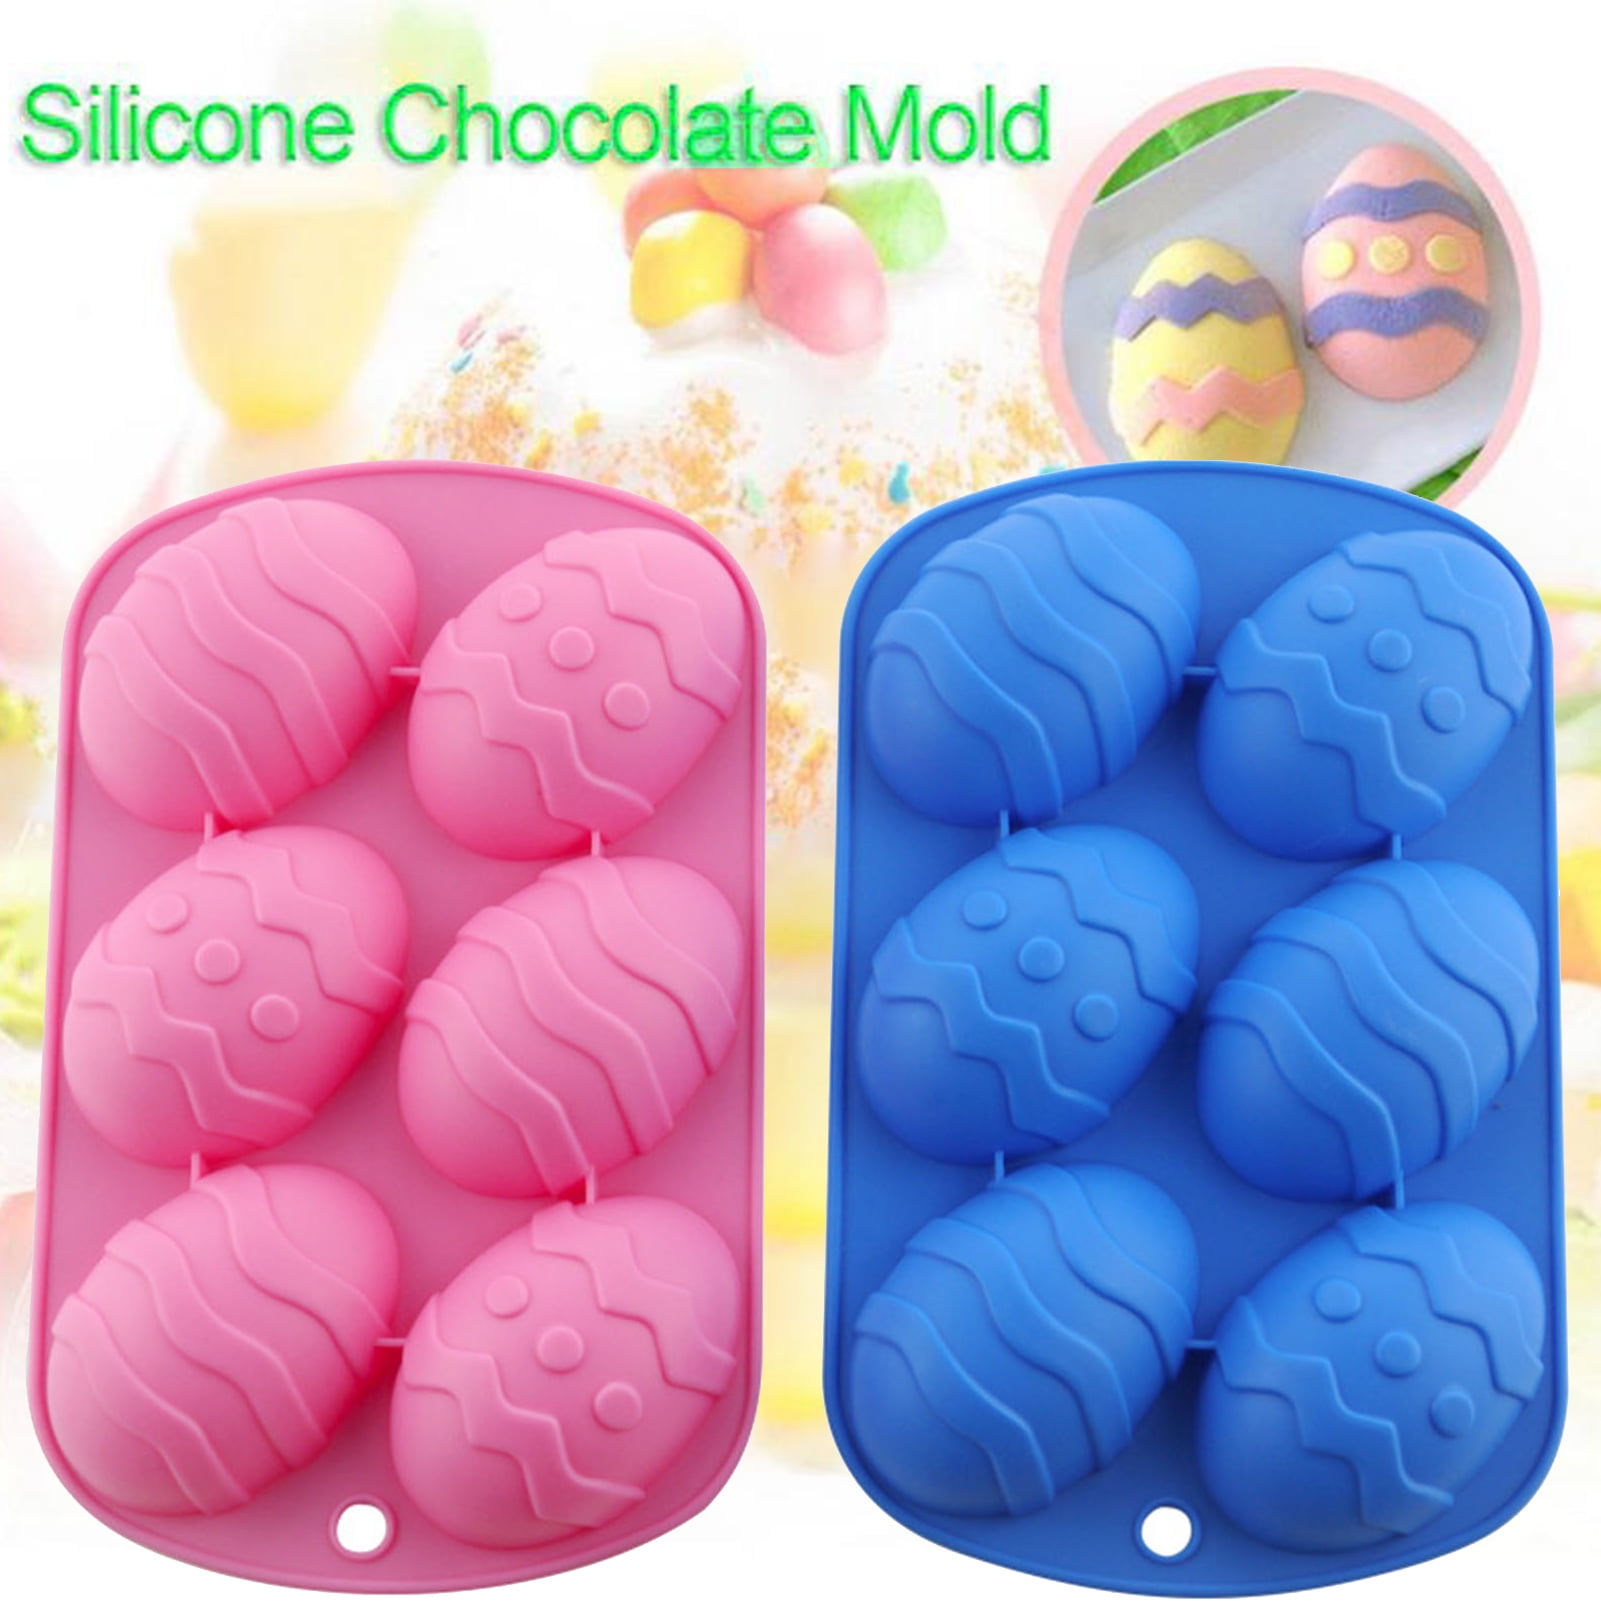 Leaves Shape Silicone Fondant Cake Mold,Eco-friendly,Non-stick,Reusable and Durable.Pastry Mould,DIY Baking Tool.Great for Making Cupcakes Decoration,Chocolate,Fondant Cake,Mousse and Candy,etc. 